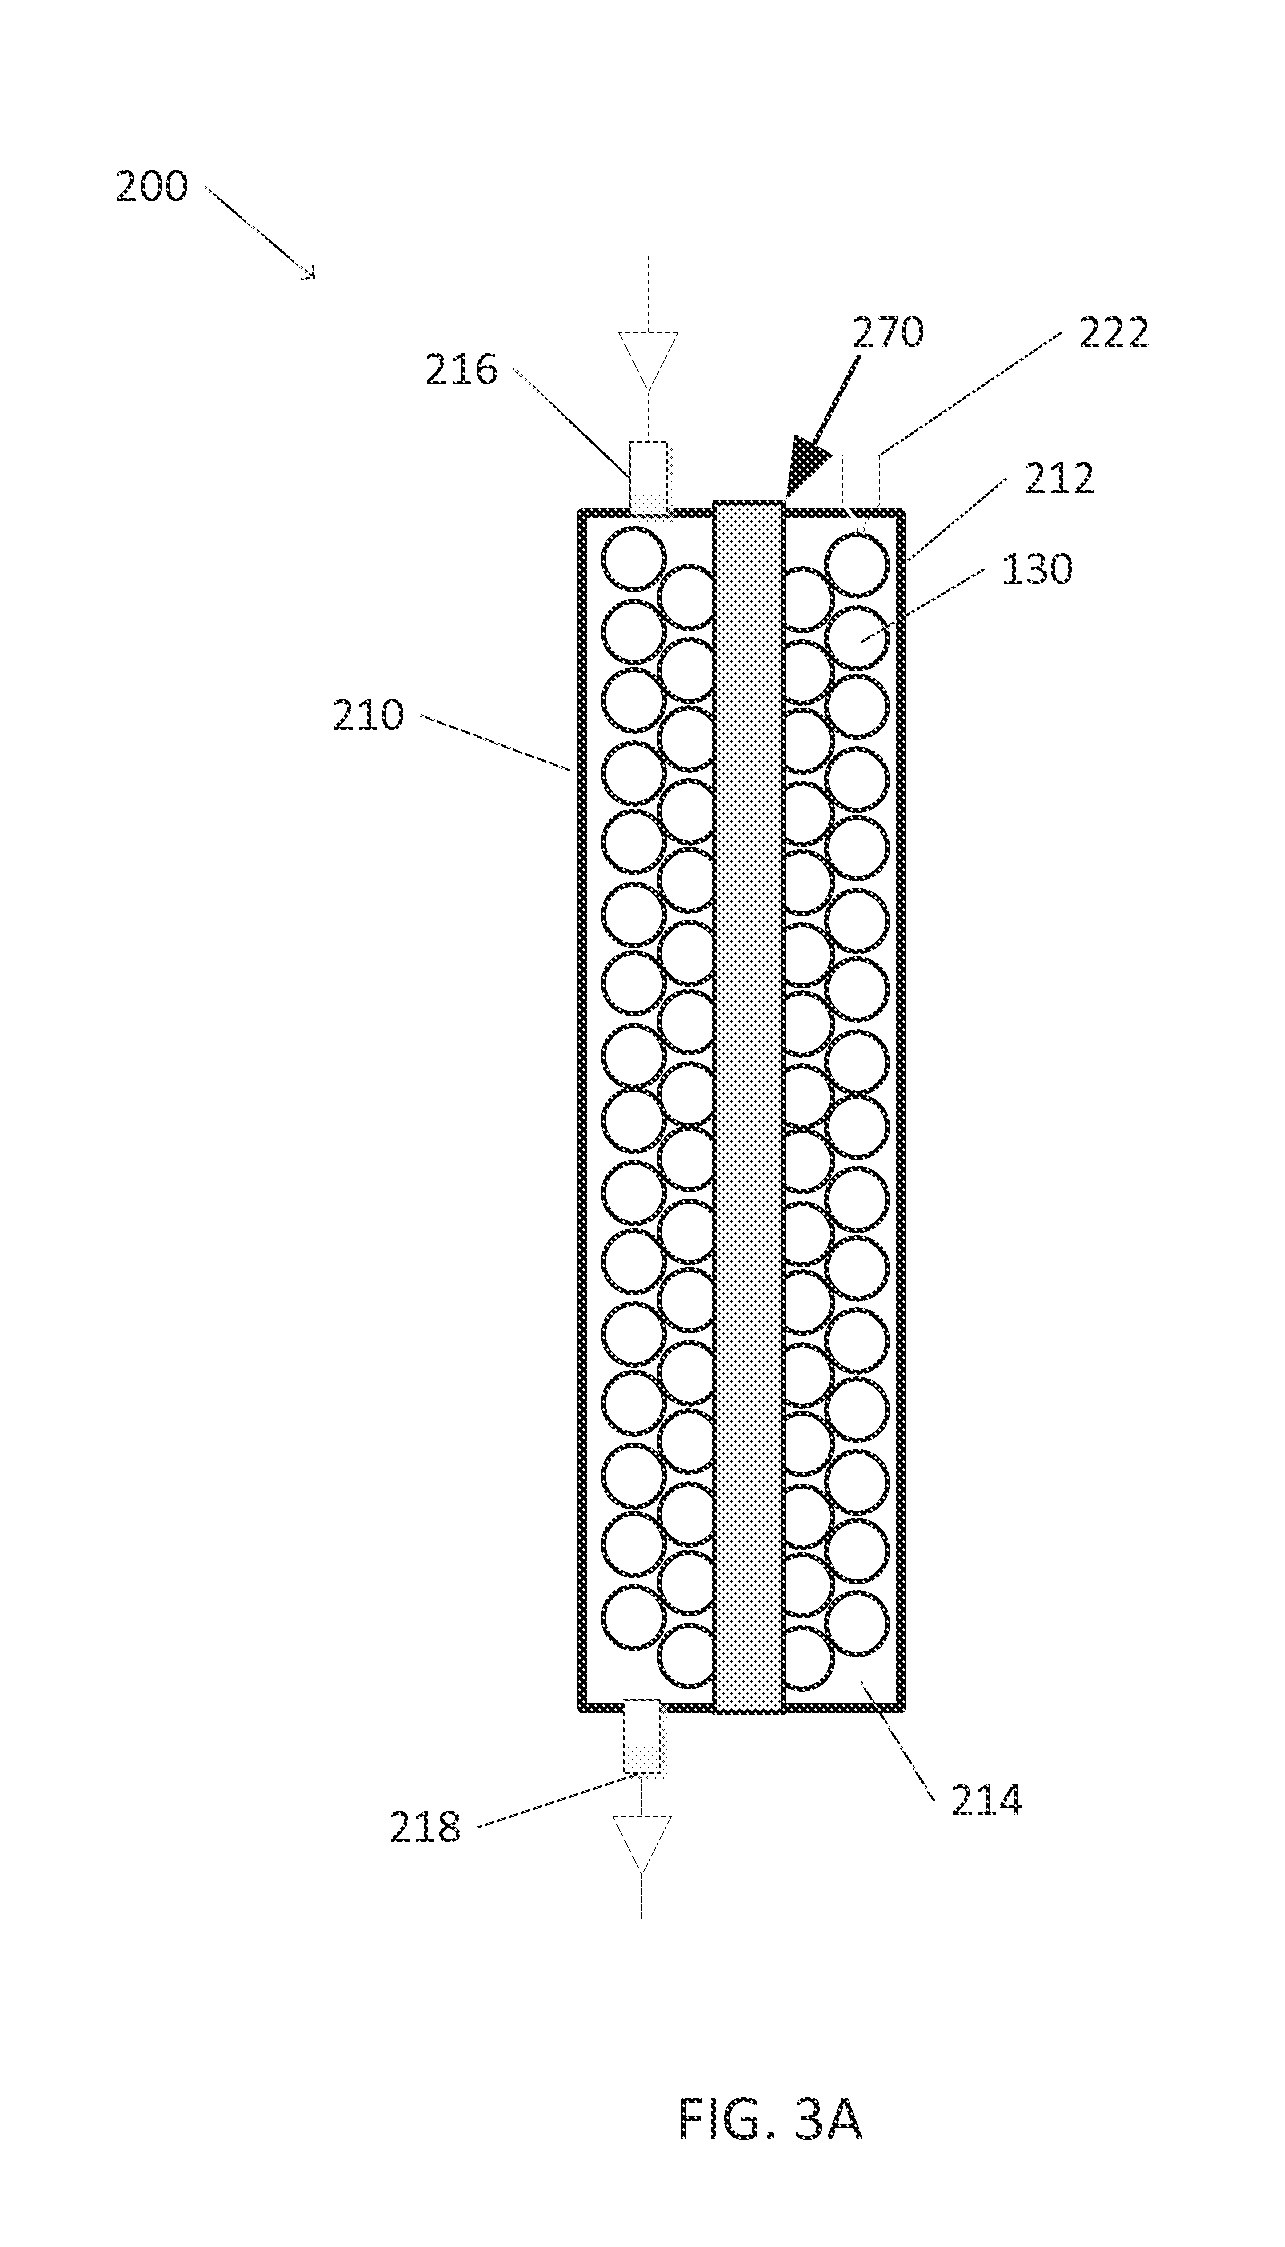 Tandem photochemical-thermochemical process for hydrocarbon production from carbon dioxide feedstock